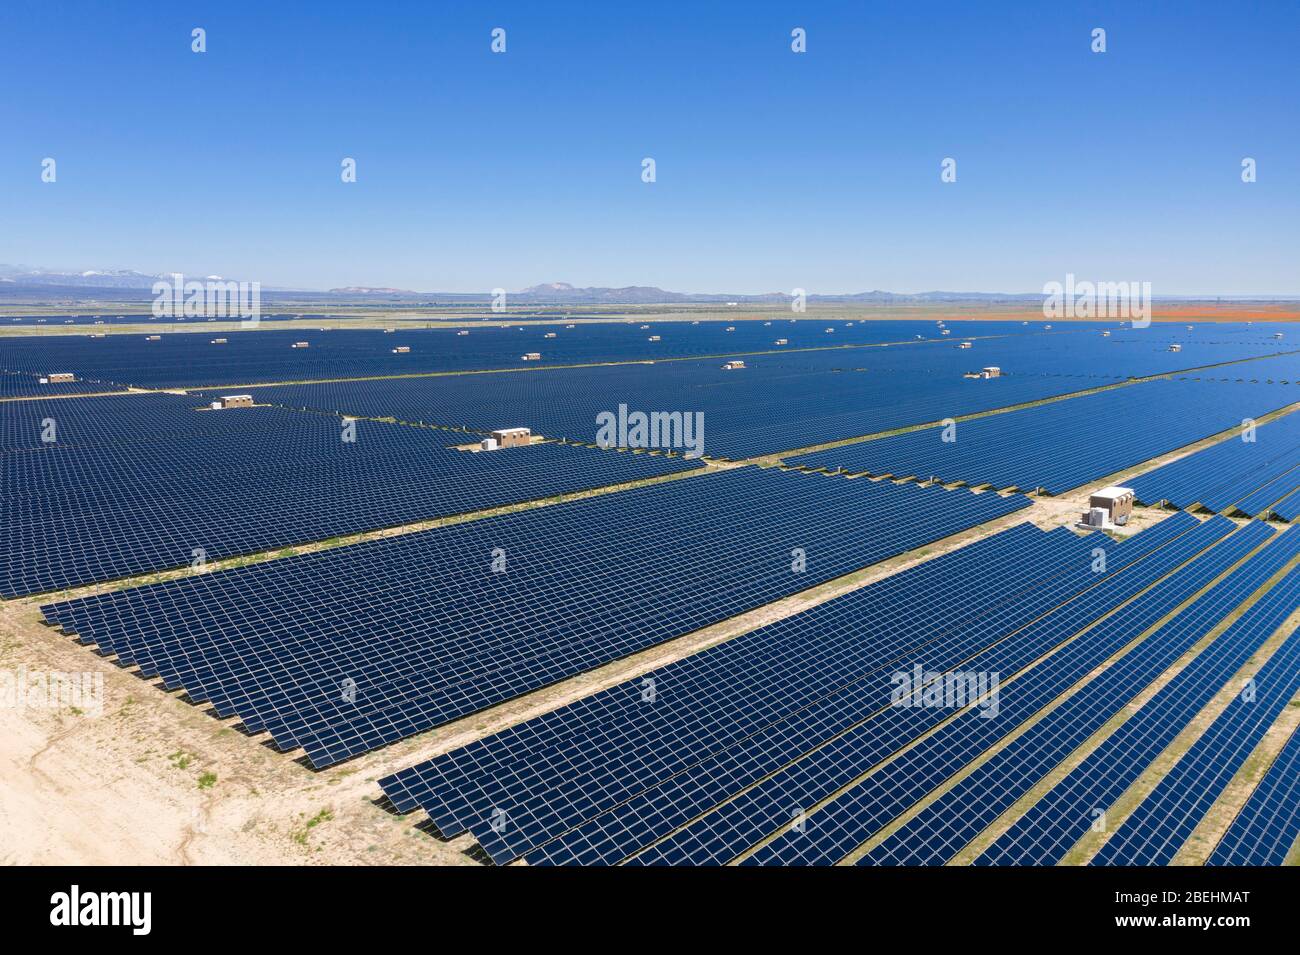 Aerial view of photovoltaic (PV) green solar ranch in the Antelope Valley in the Mojave desert of California Stock Photo